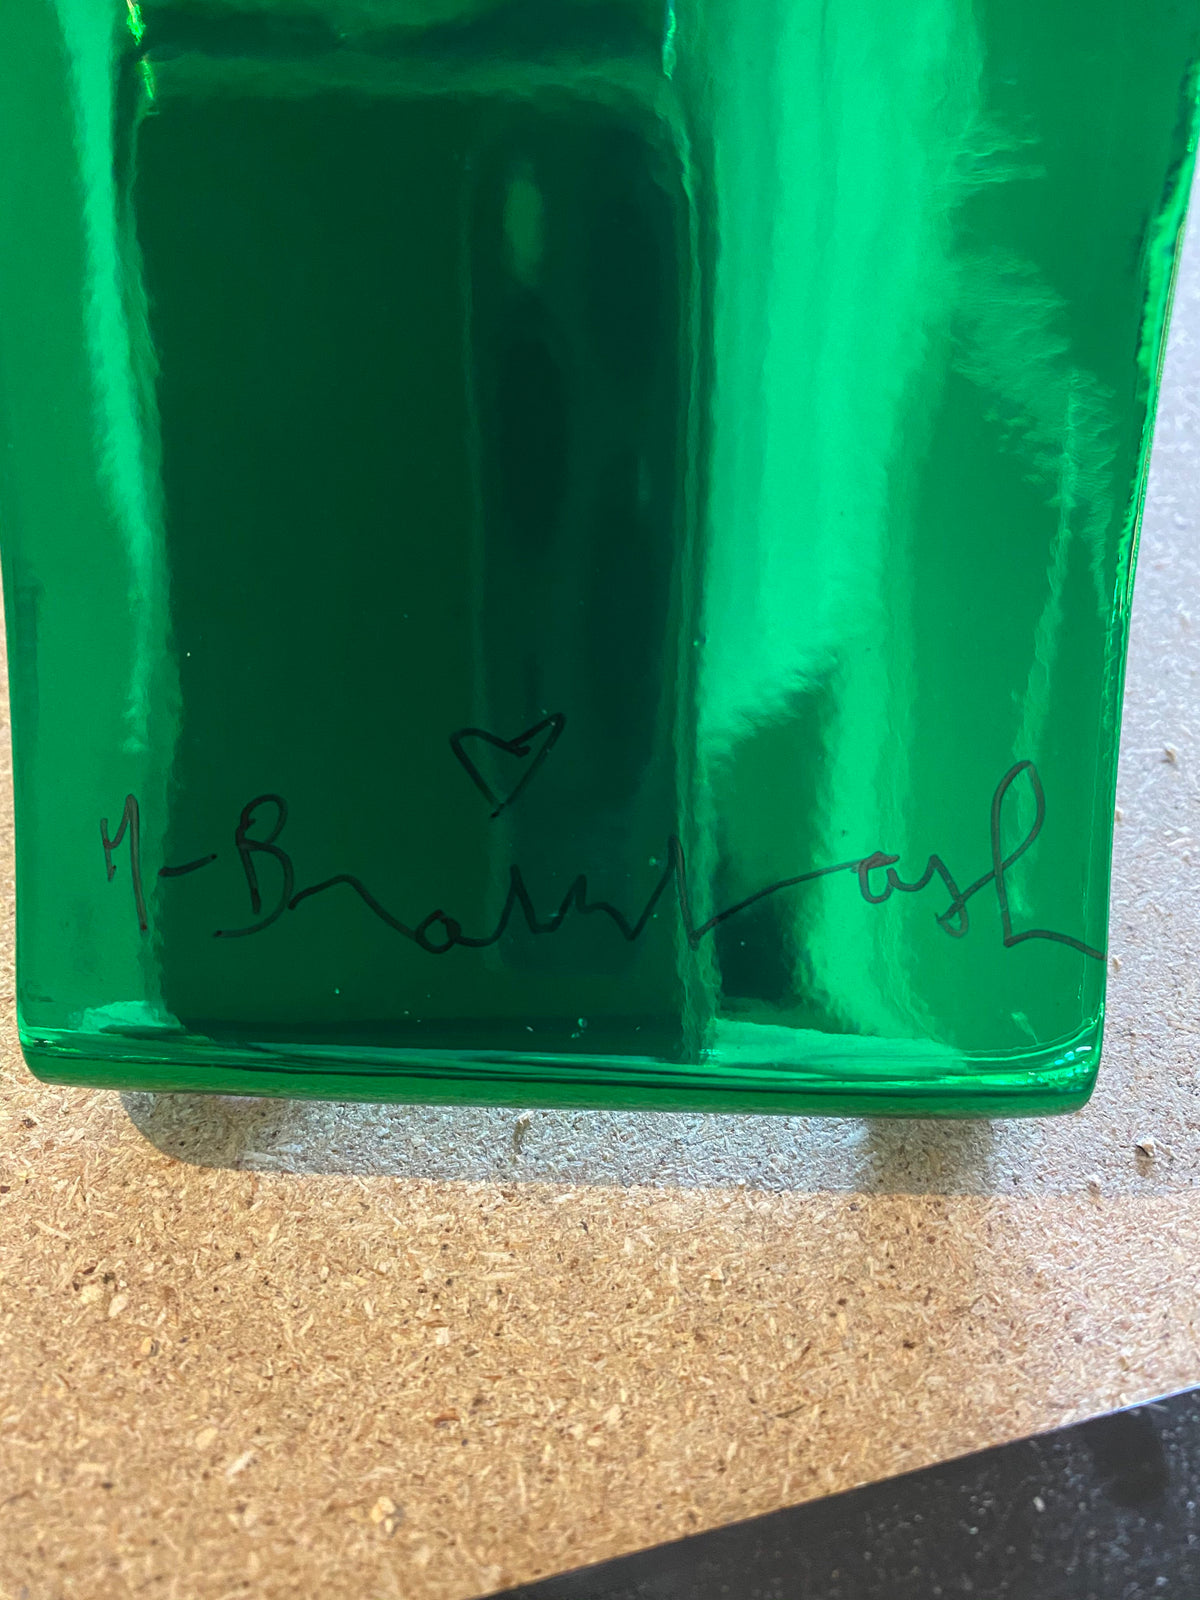 A green reflective piece of metal with a signature on it